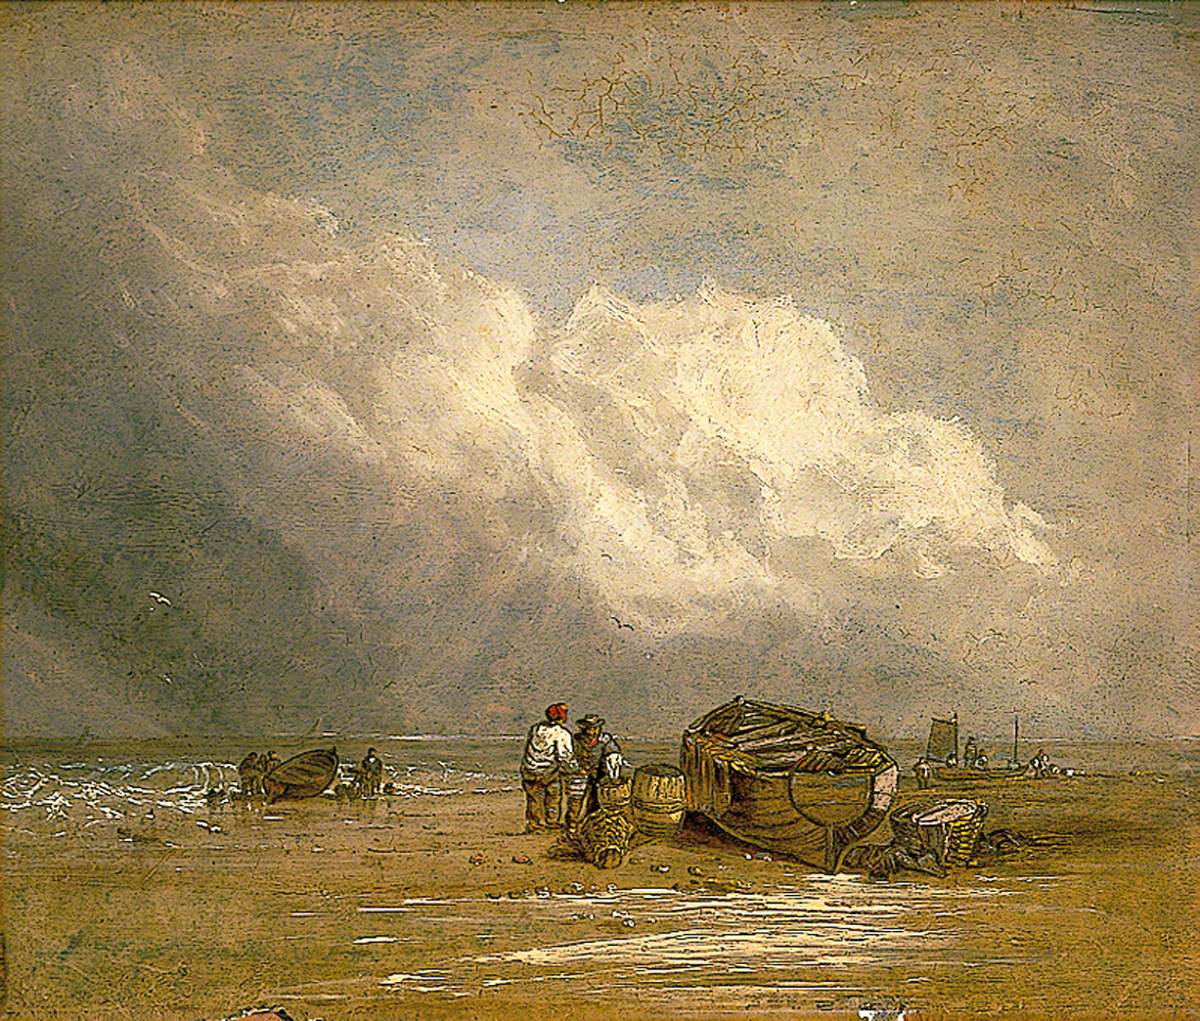 Fishermen on a Beach with Boats